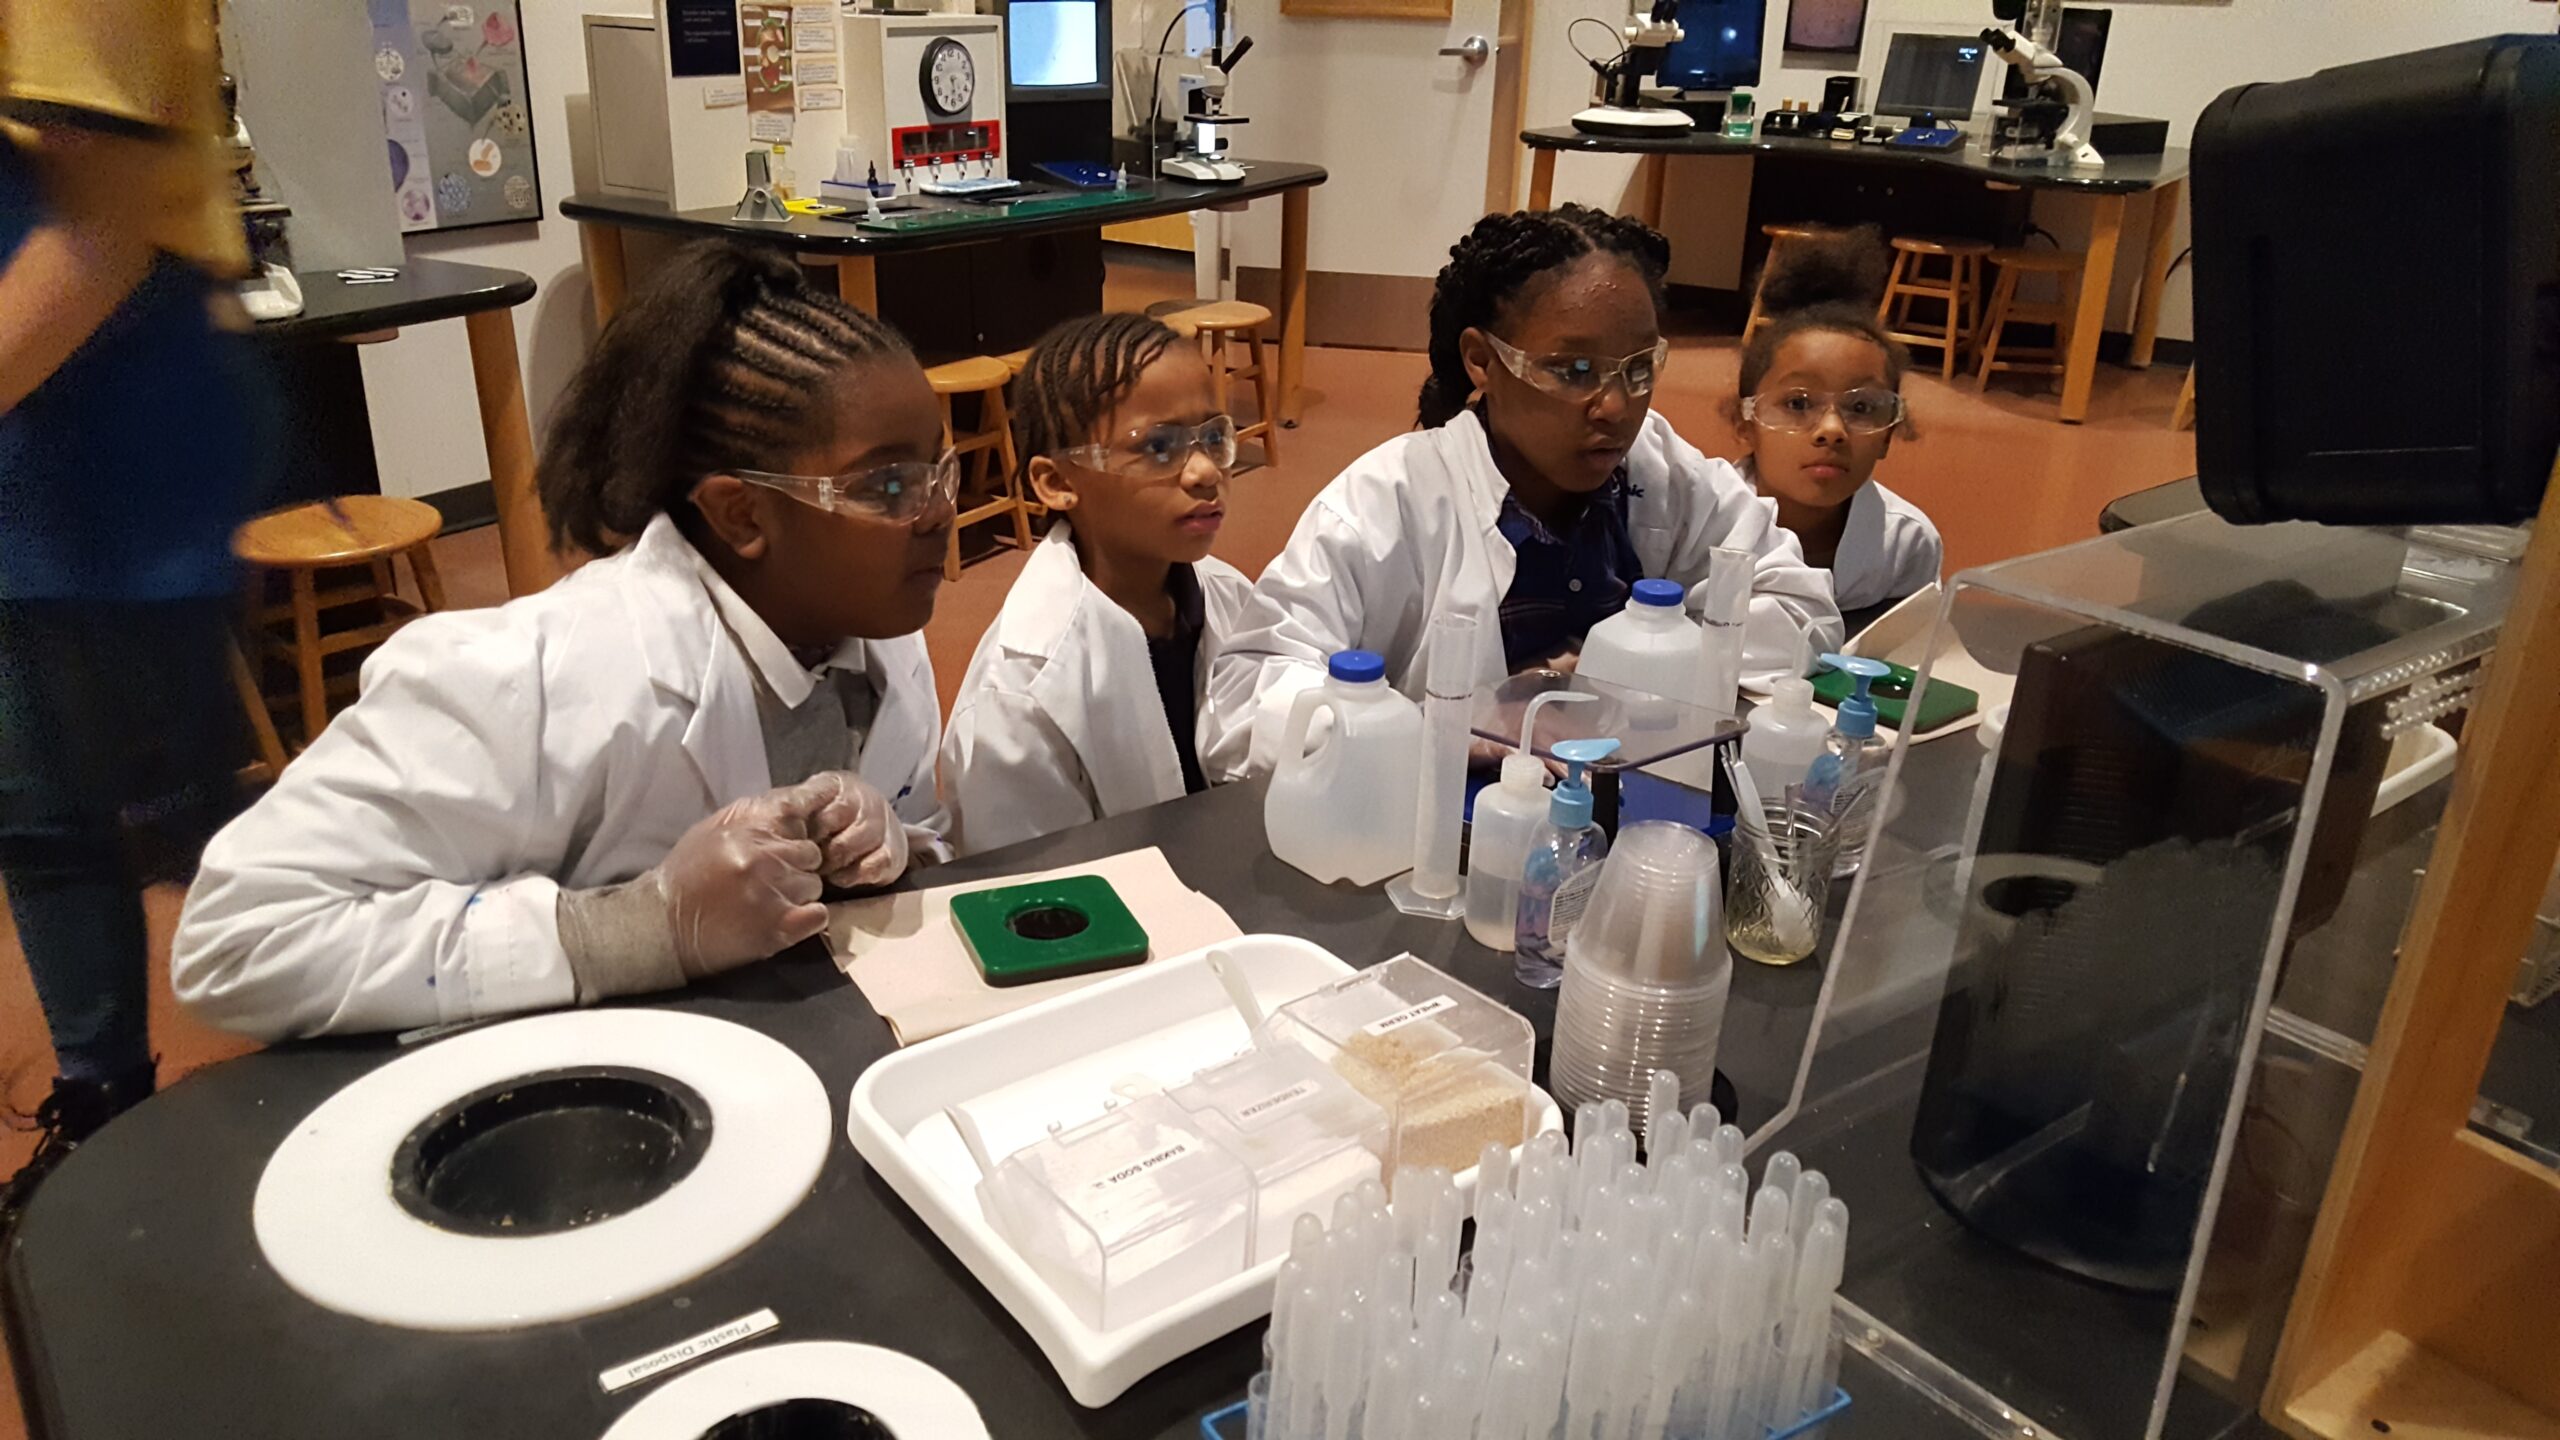 Four students wearing lab coats and goggles conducting an experiment in a science classroom